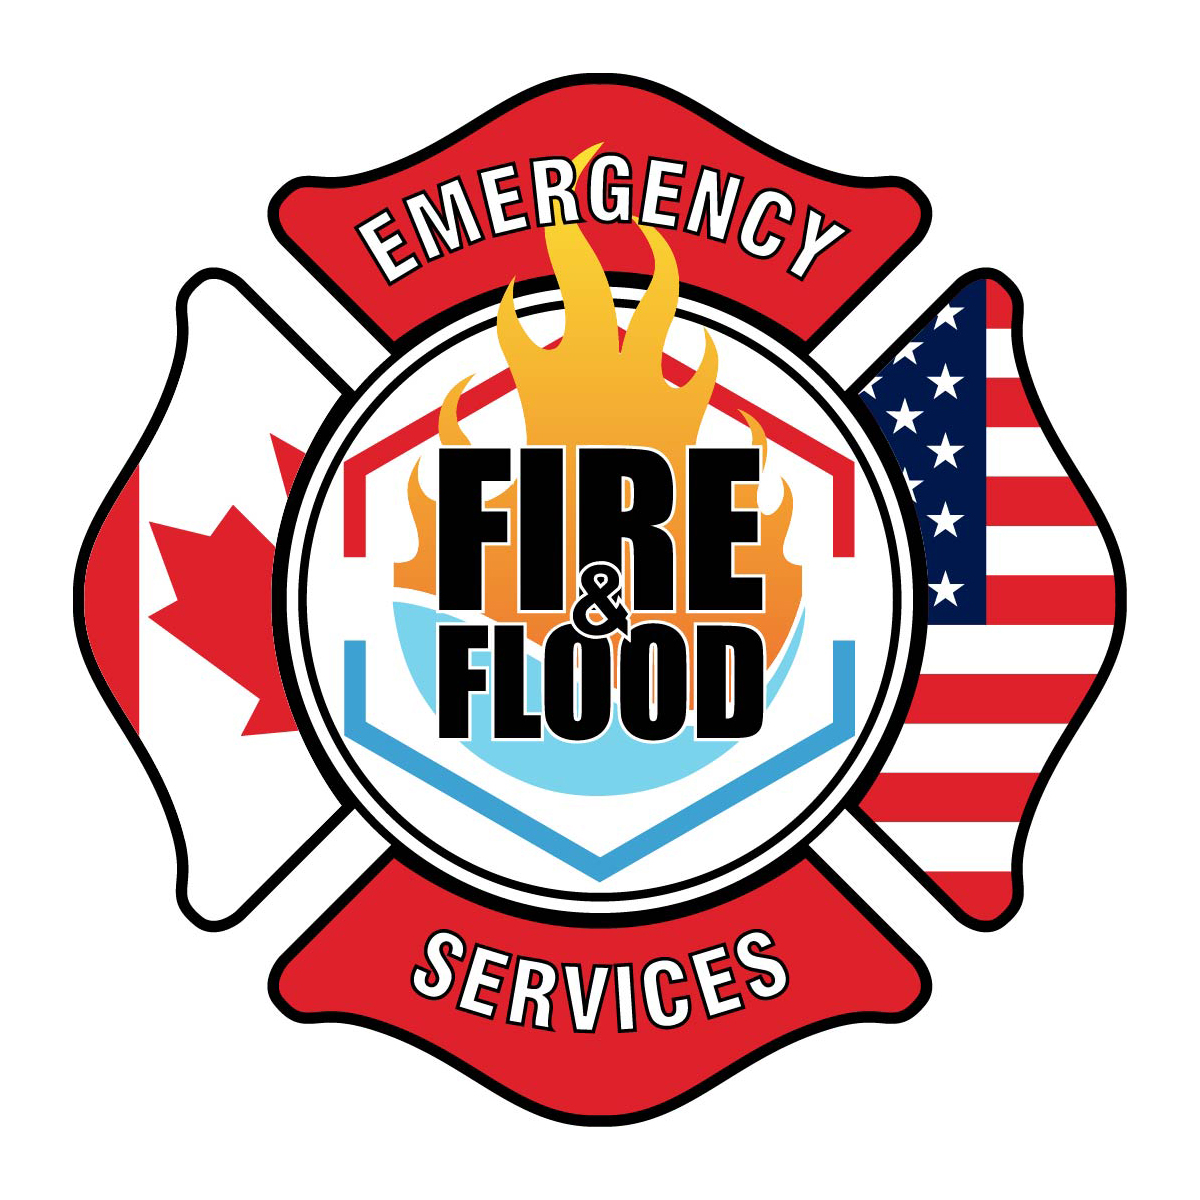 Fire & Flood Emergency Services